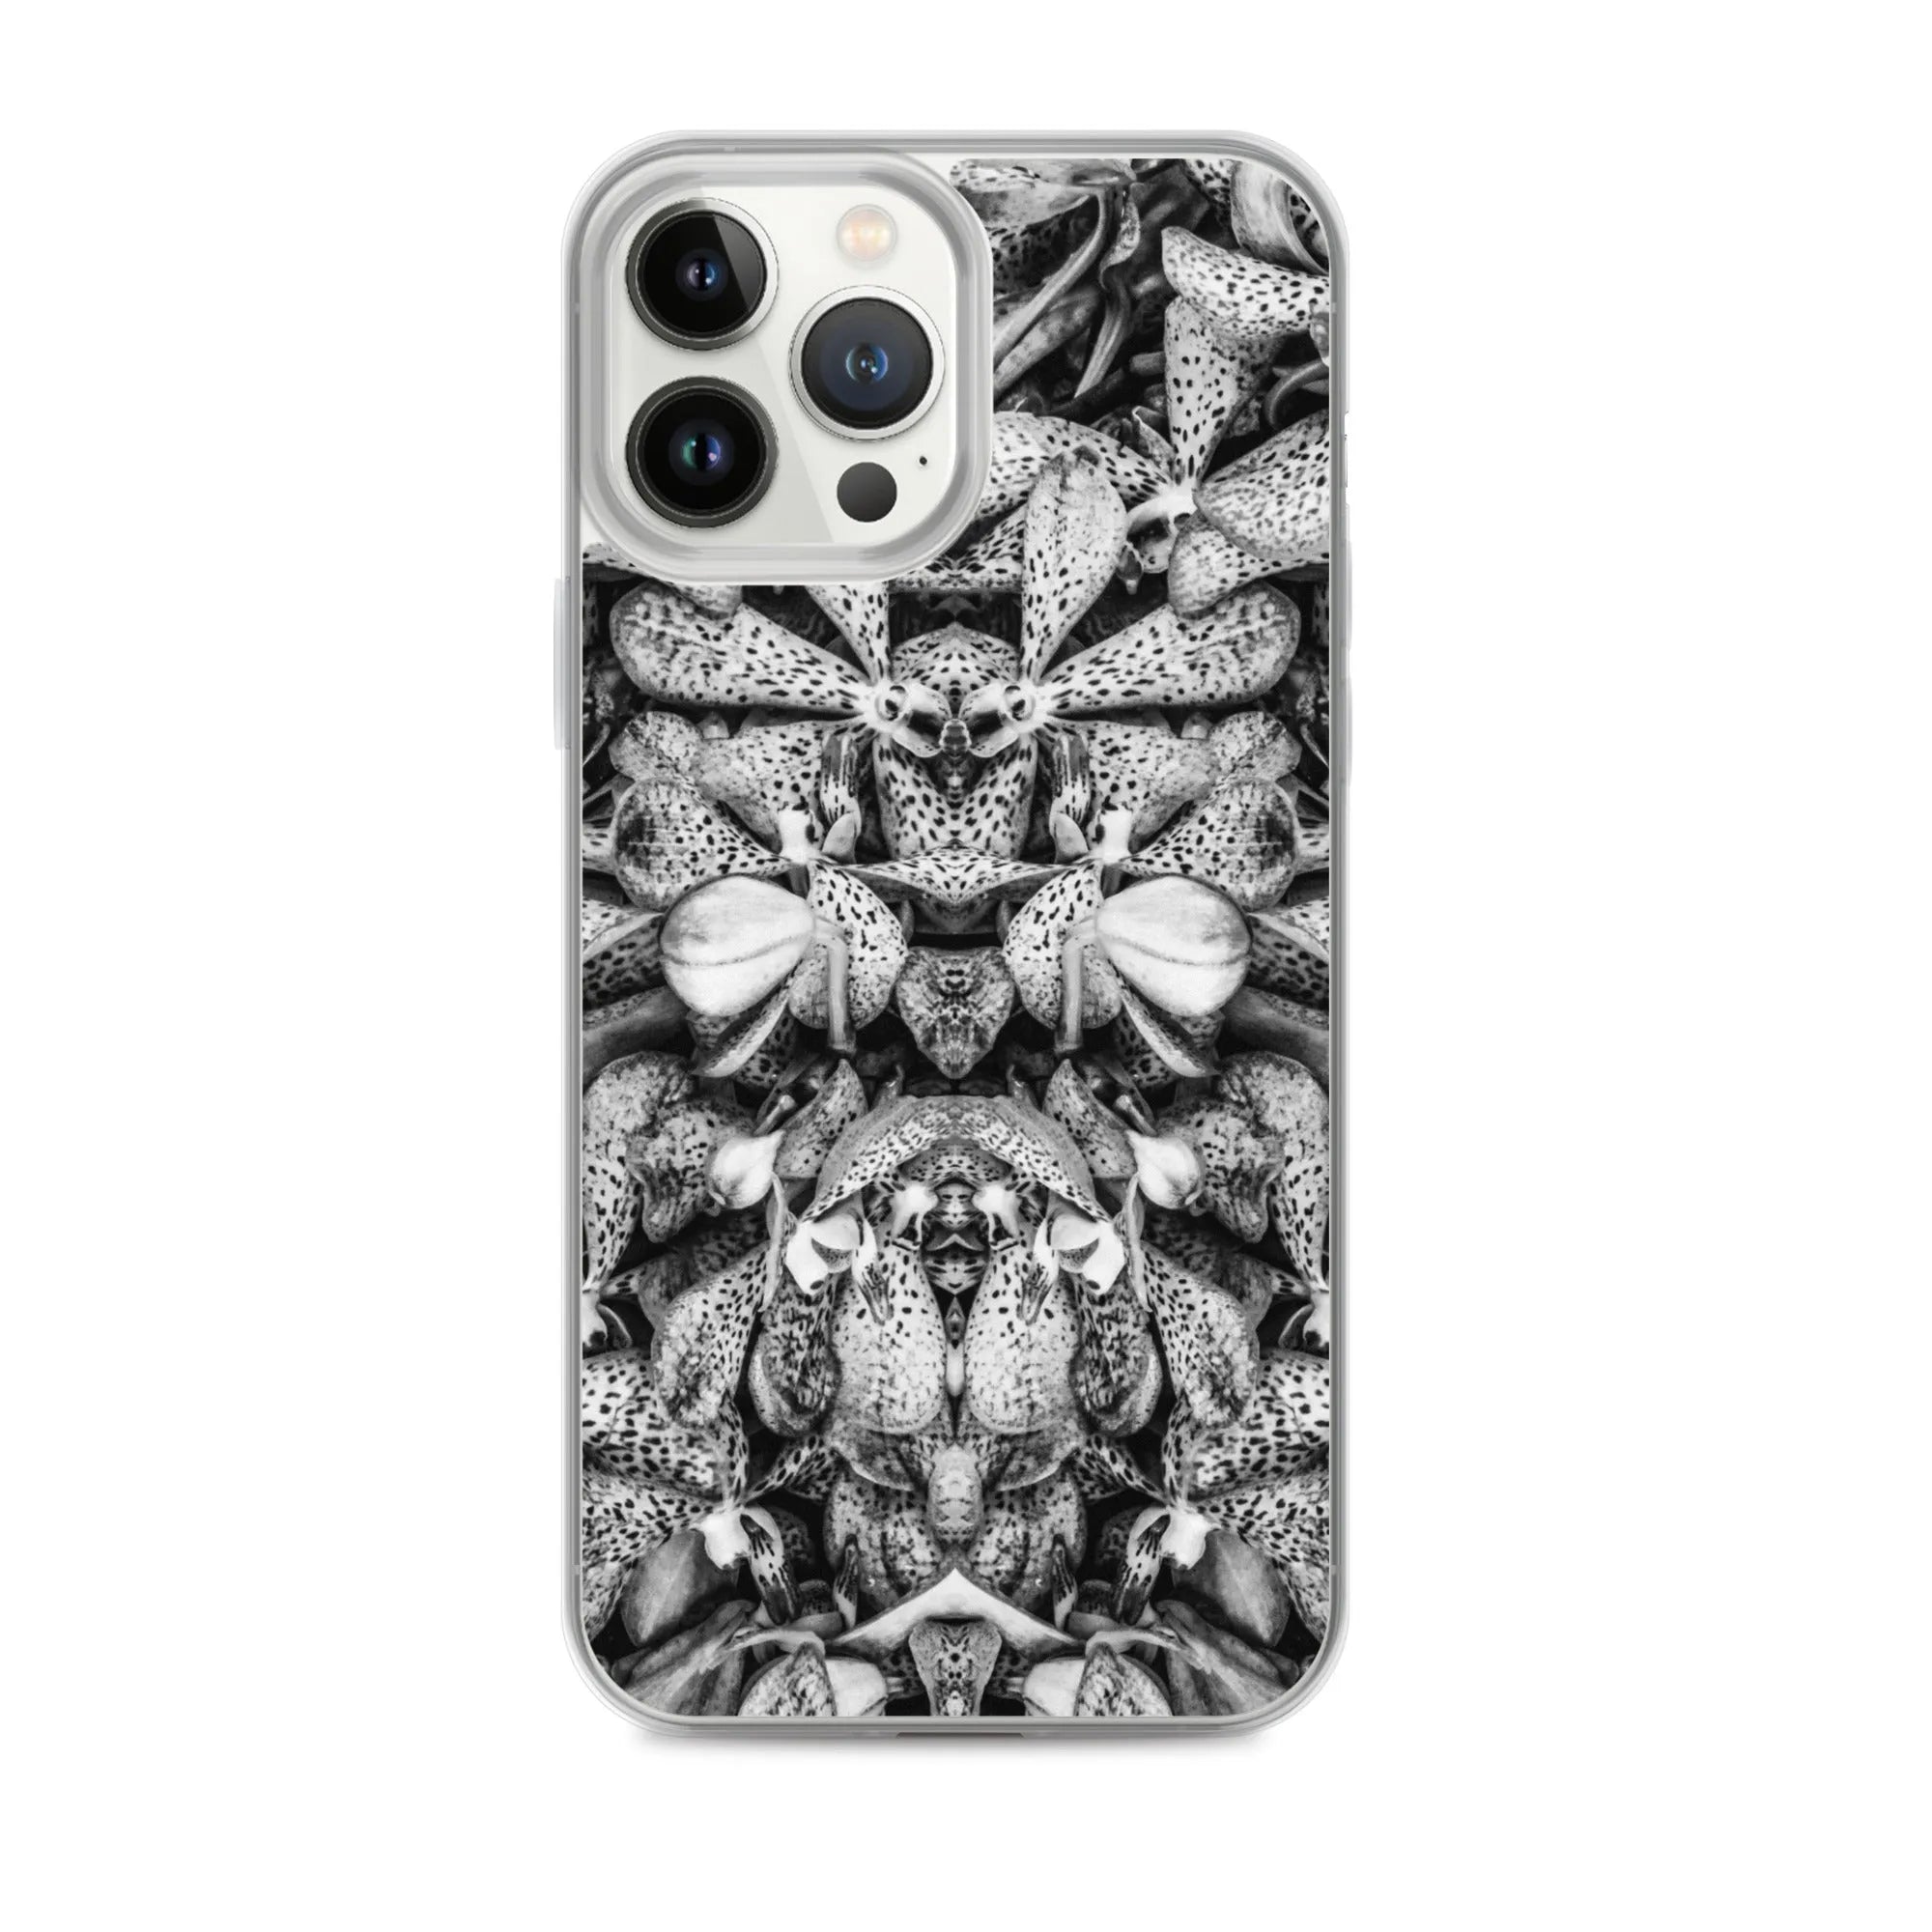 Tickled Pink² Floral Iphone Case - Black And White - Iphone 13 Pro Max - Mobile Phone Cases - Aesthetic Art